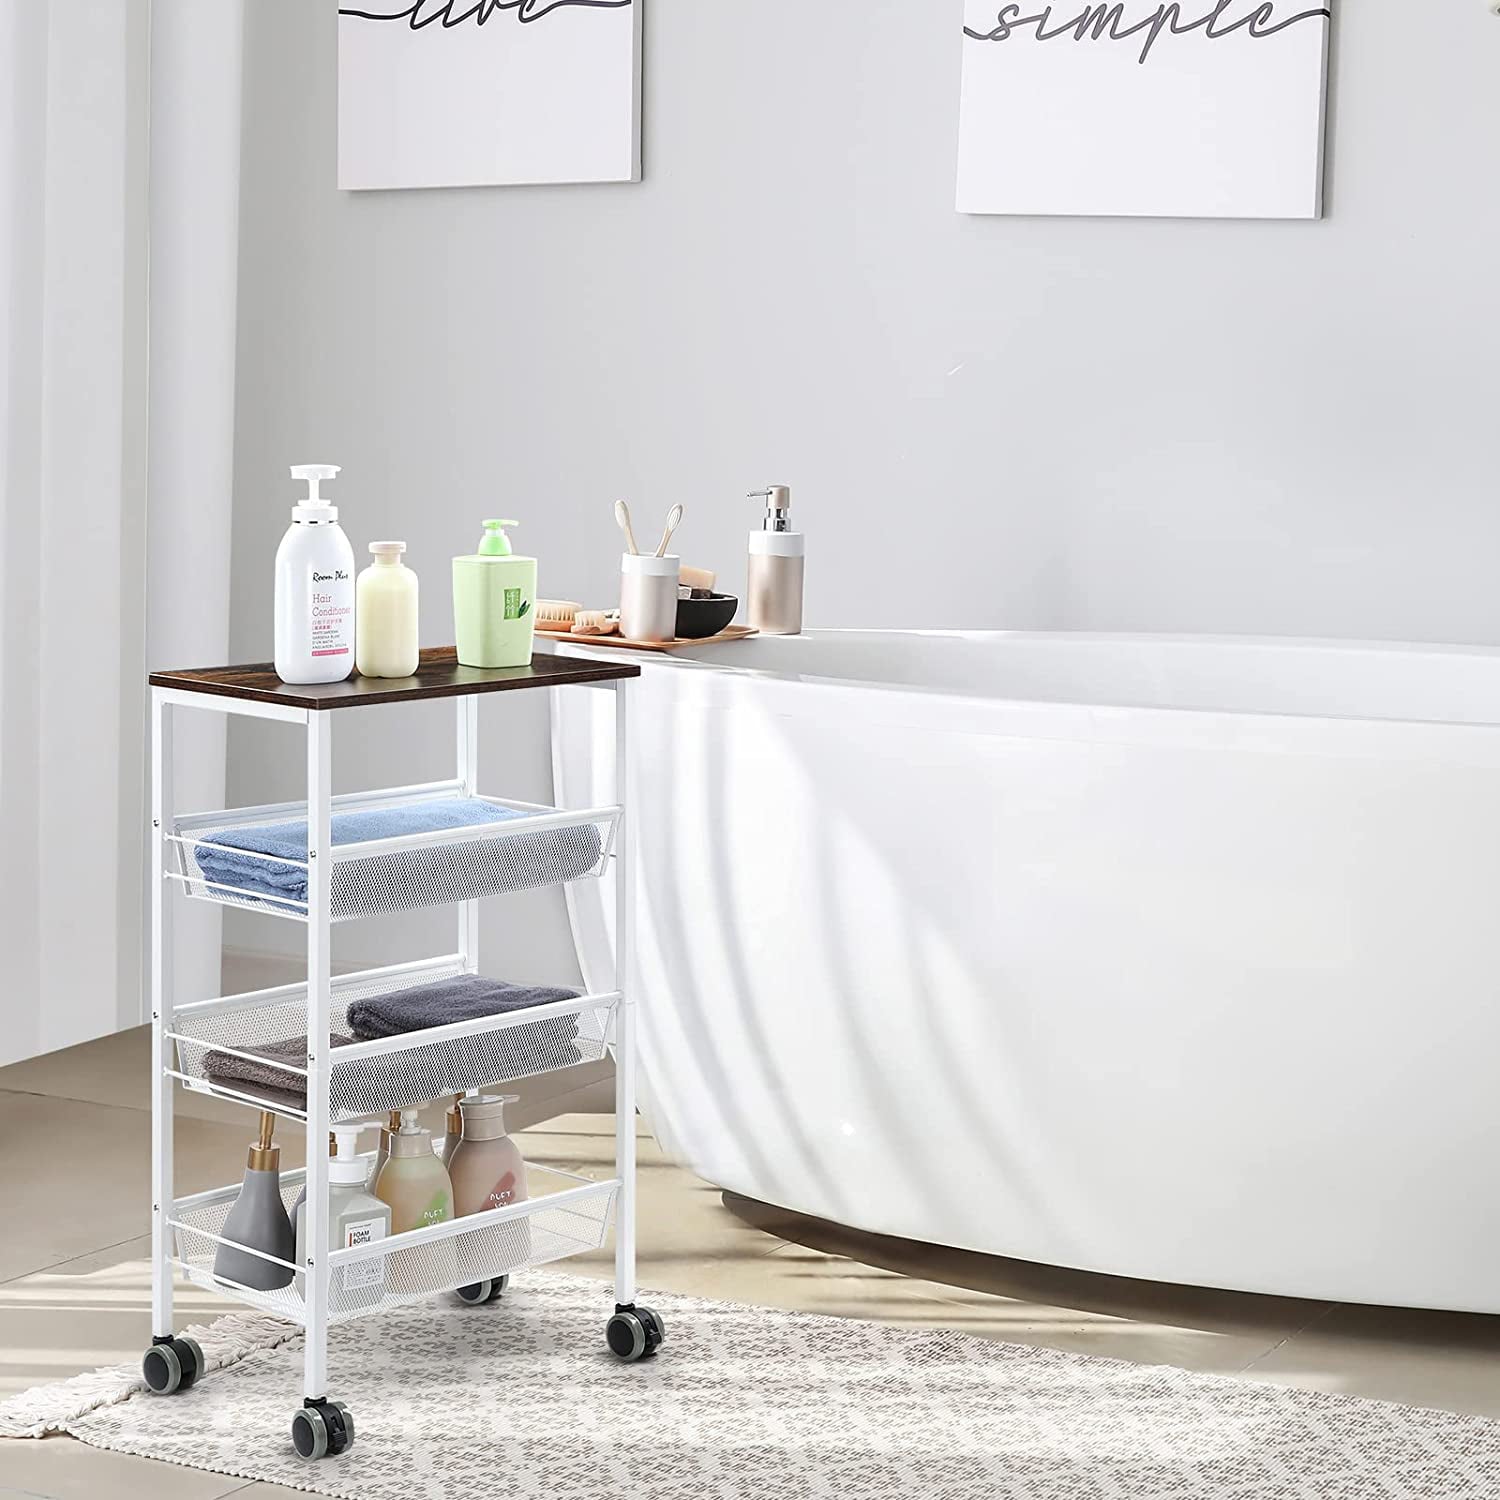 3 Tier Kitchen Storage Rack Cart with Lockable Wheels and Wood Top， White